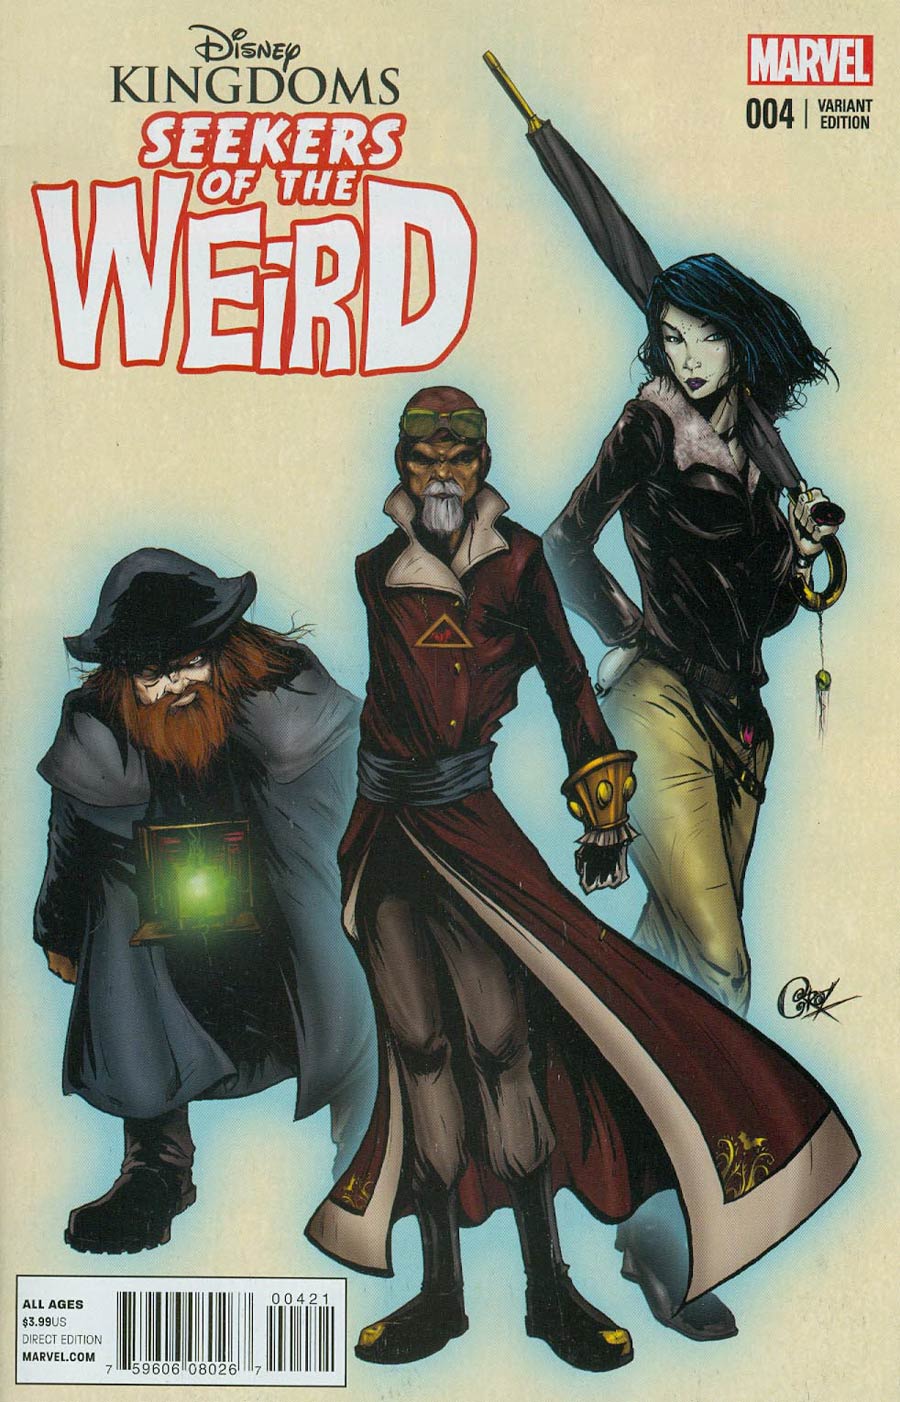 Disney Kingdoms Seekers Of The Weird #4 Cover B Incentive Brian Crosby Imagineer Variant Cover